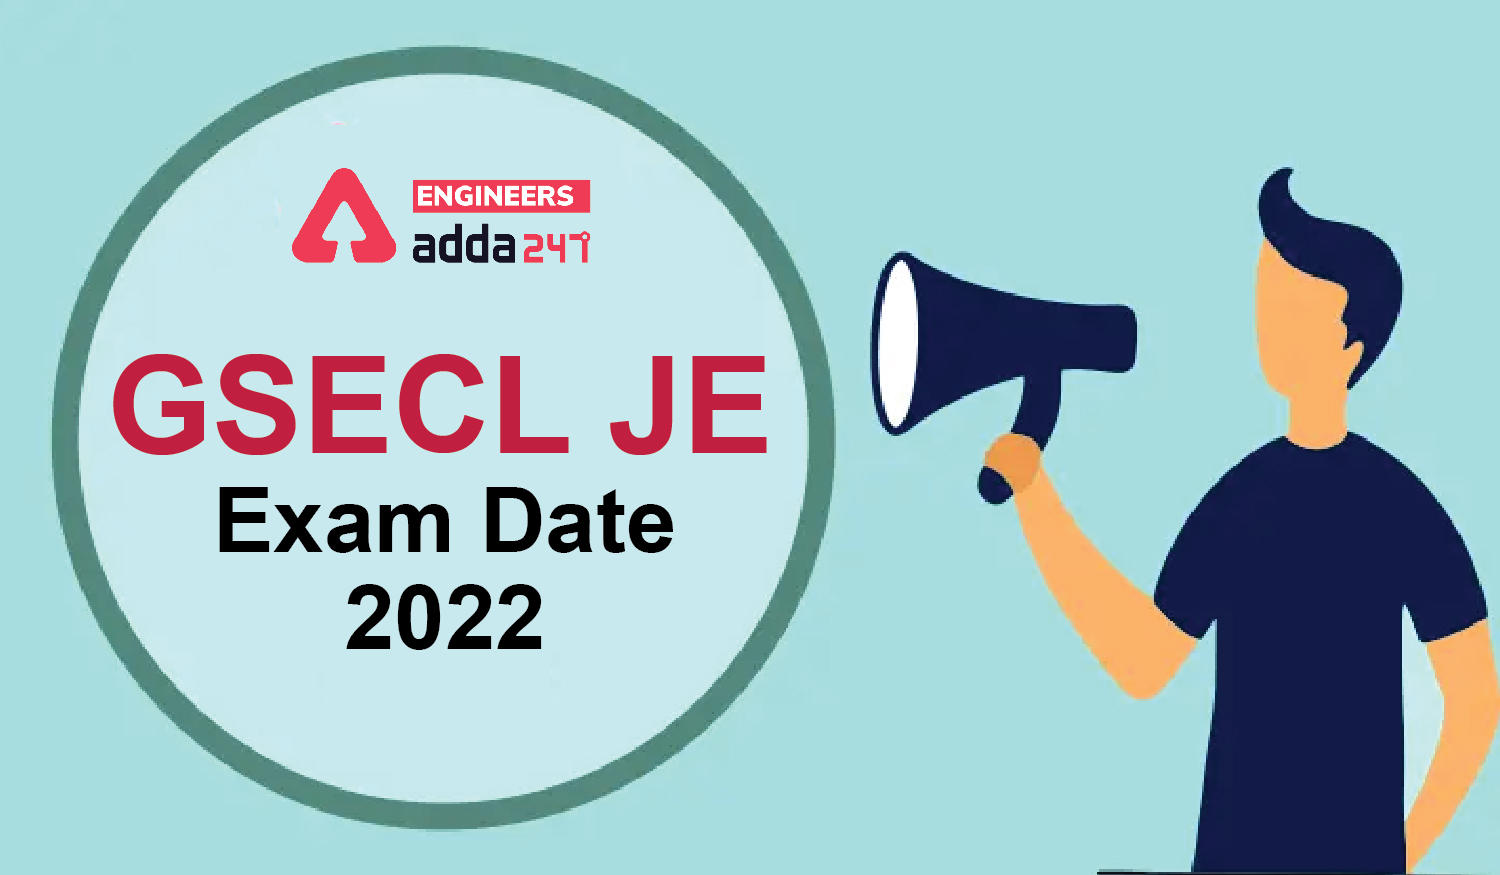 GSECL JE Exam Date 2022